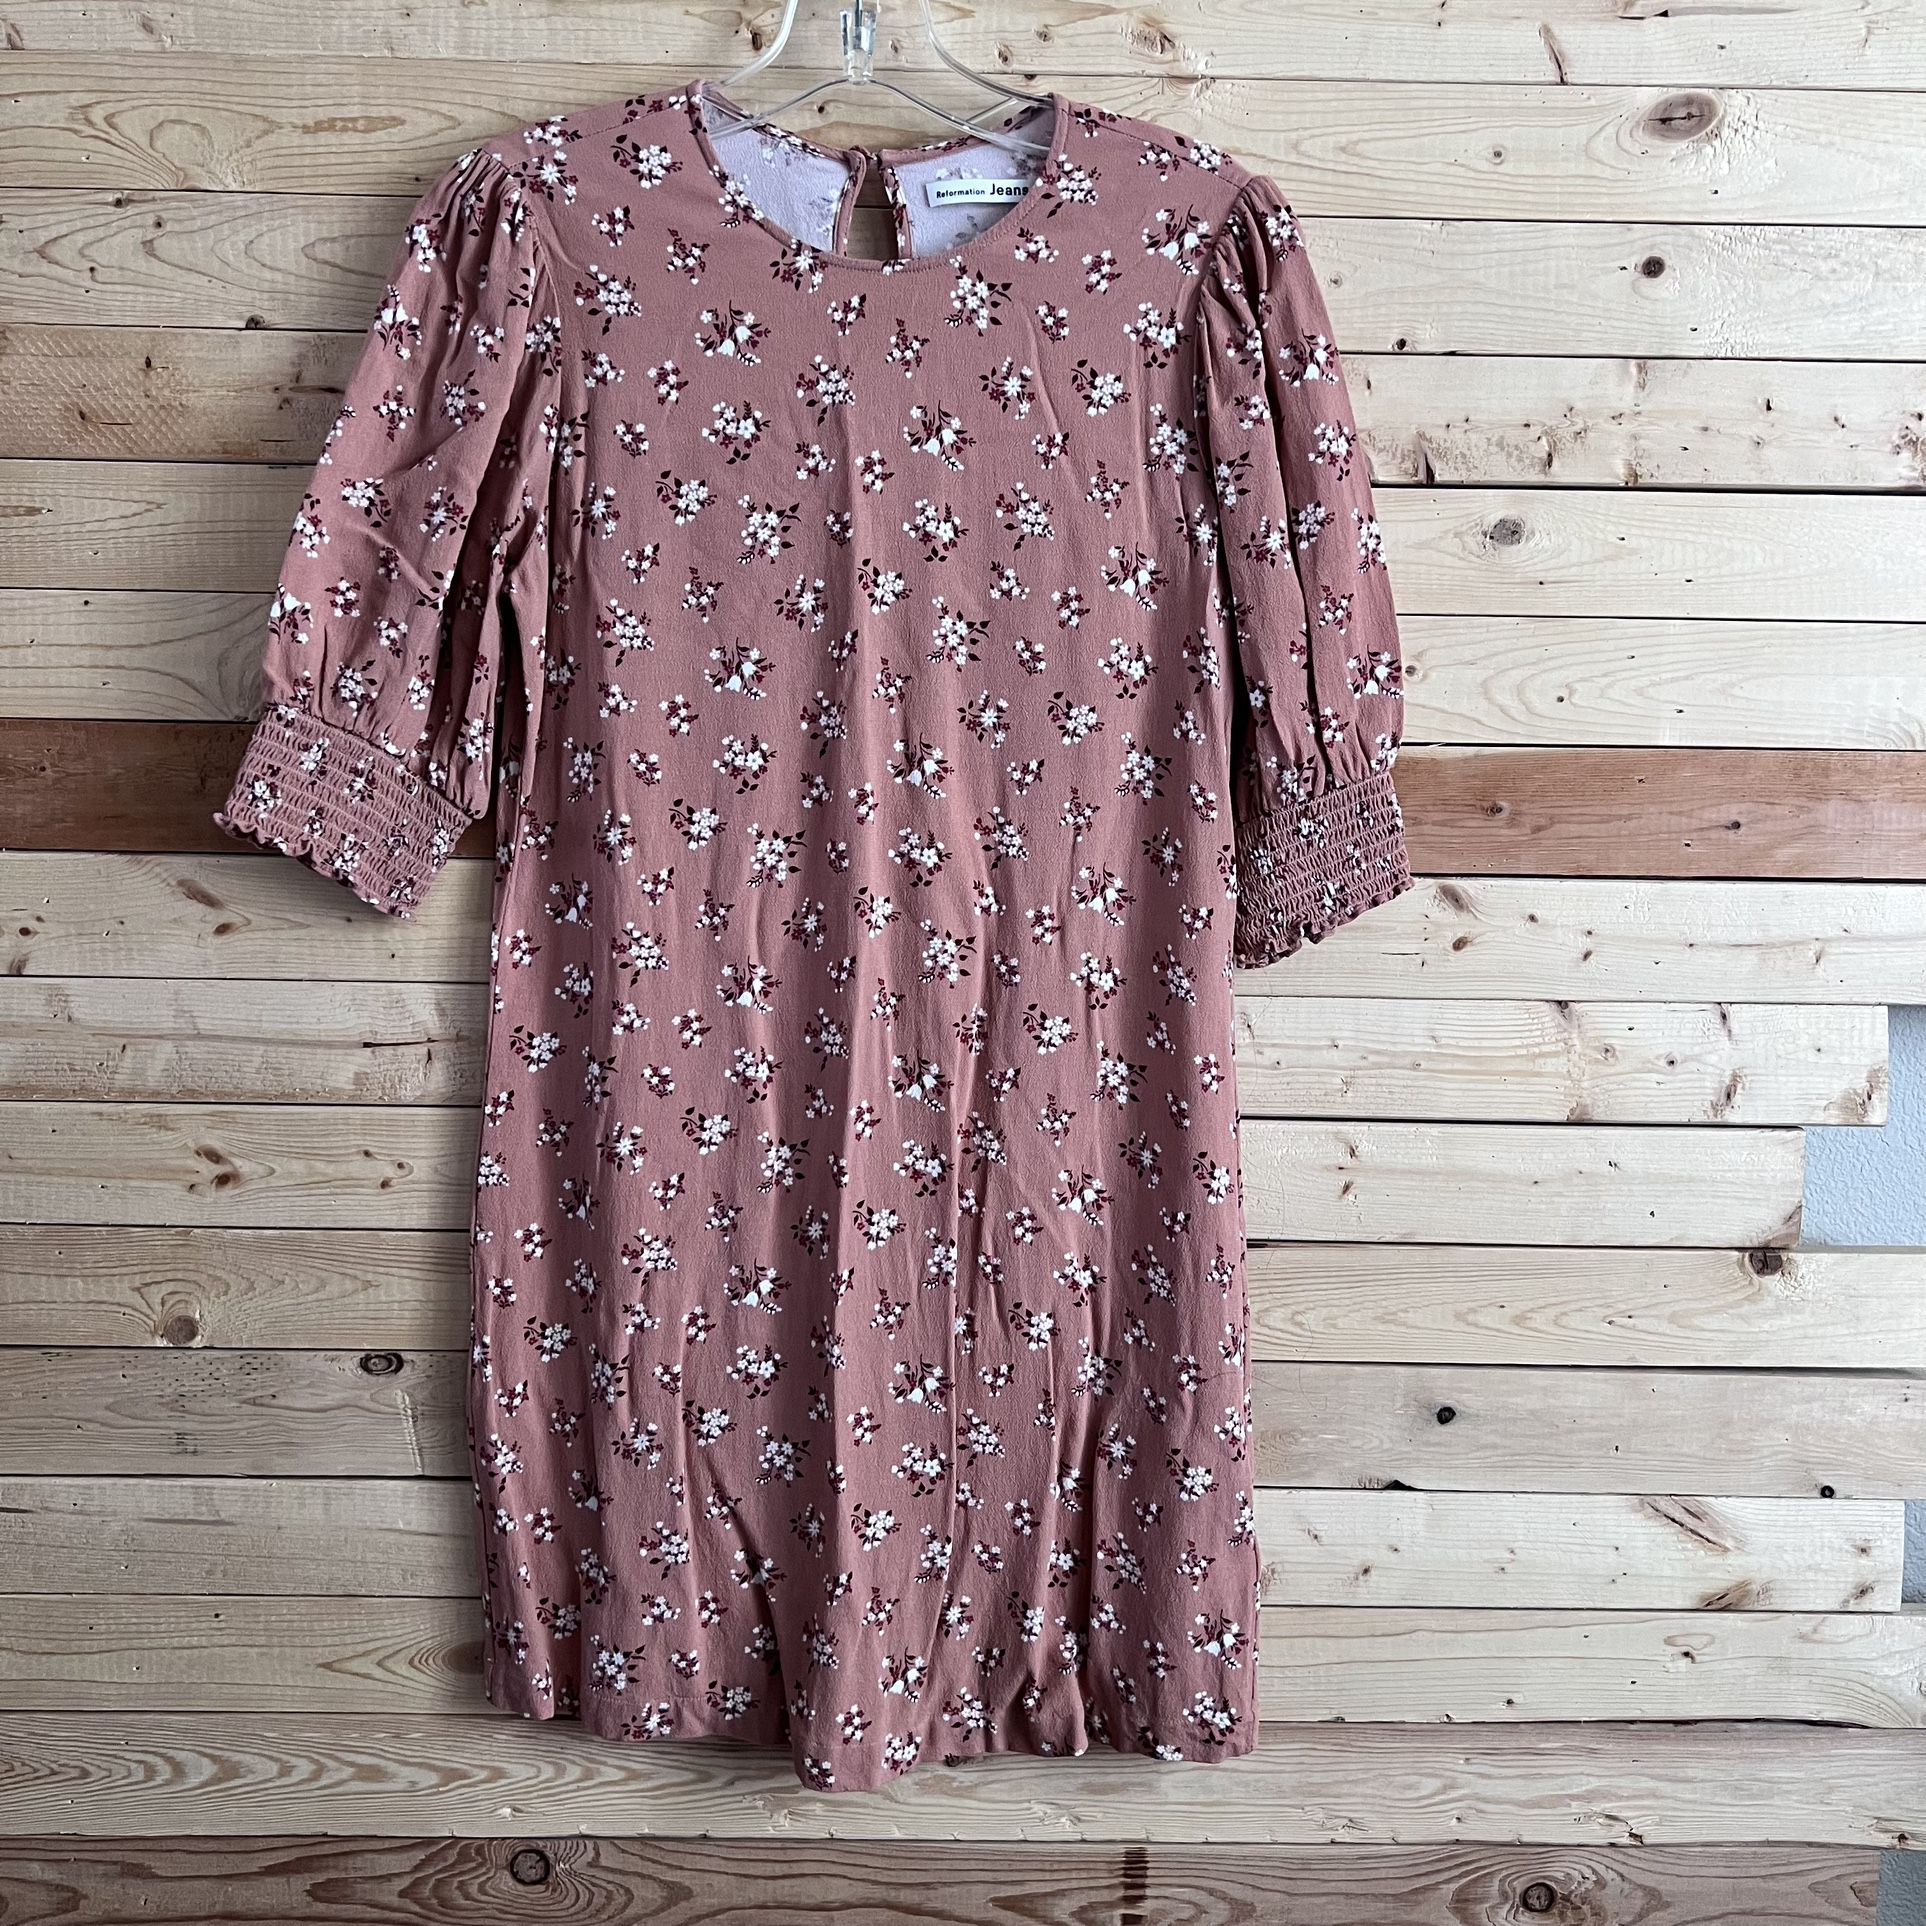 Reformation Blush Pink Lea Ina Floral Print Relaxed dress size M